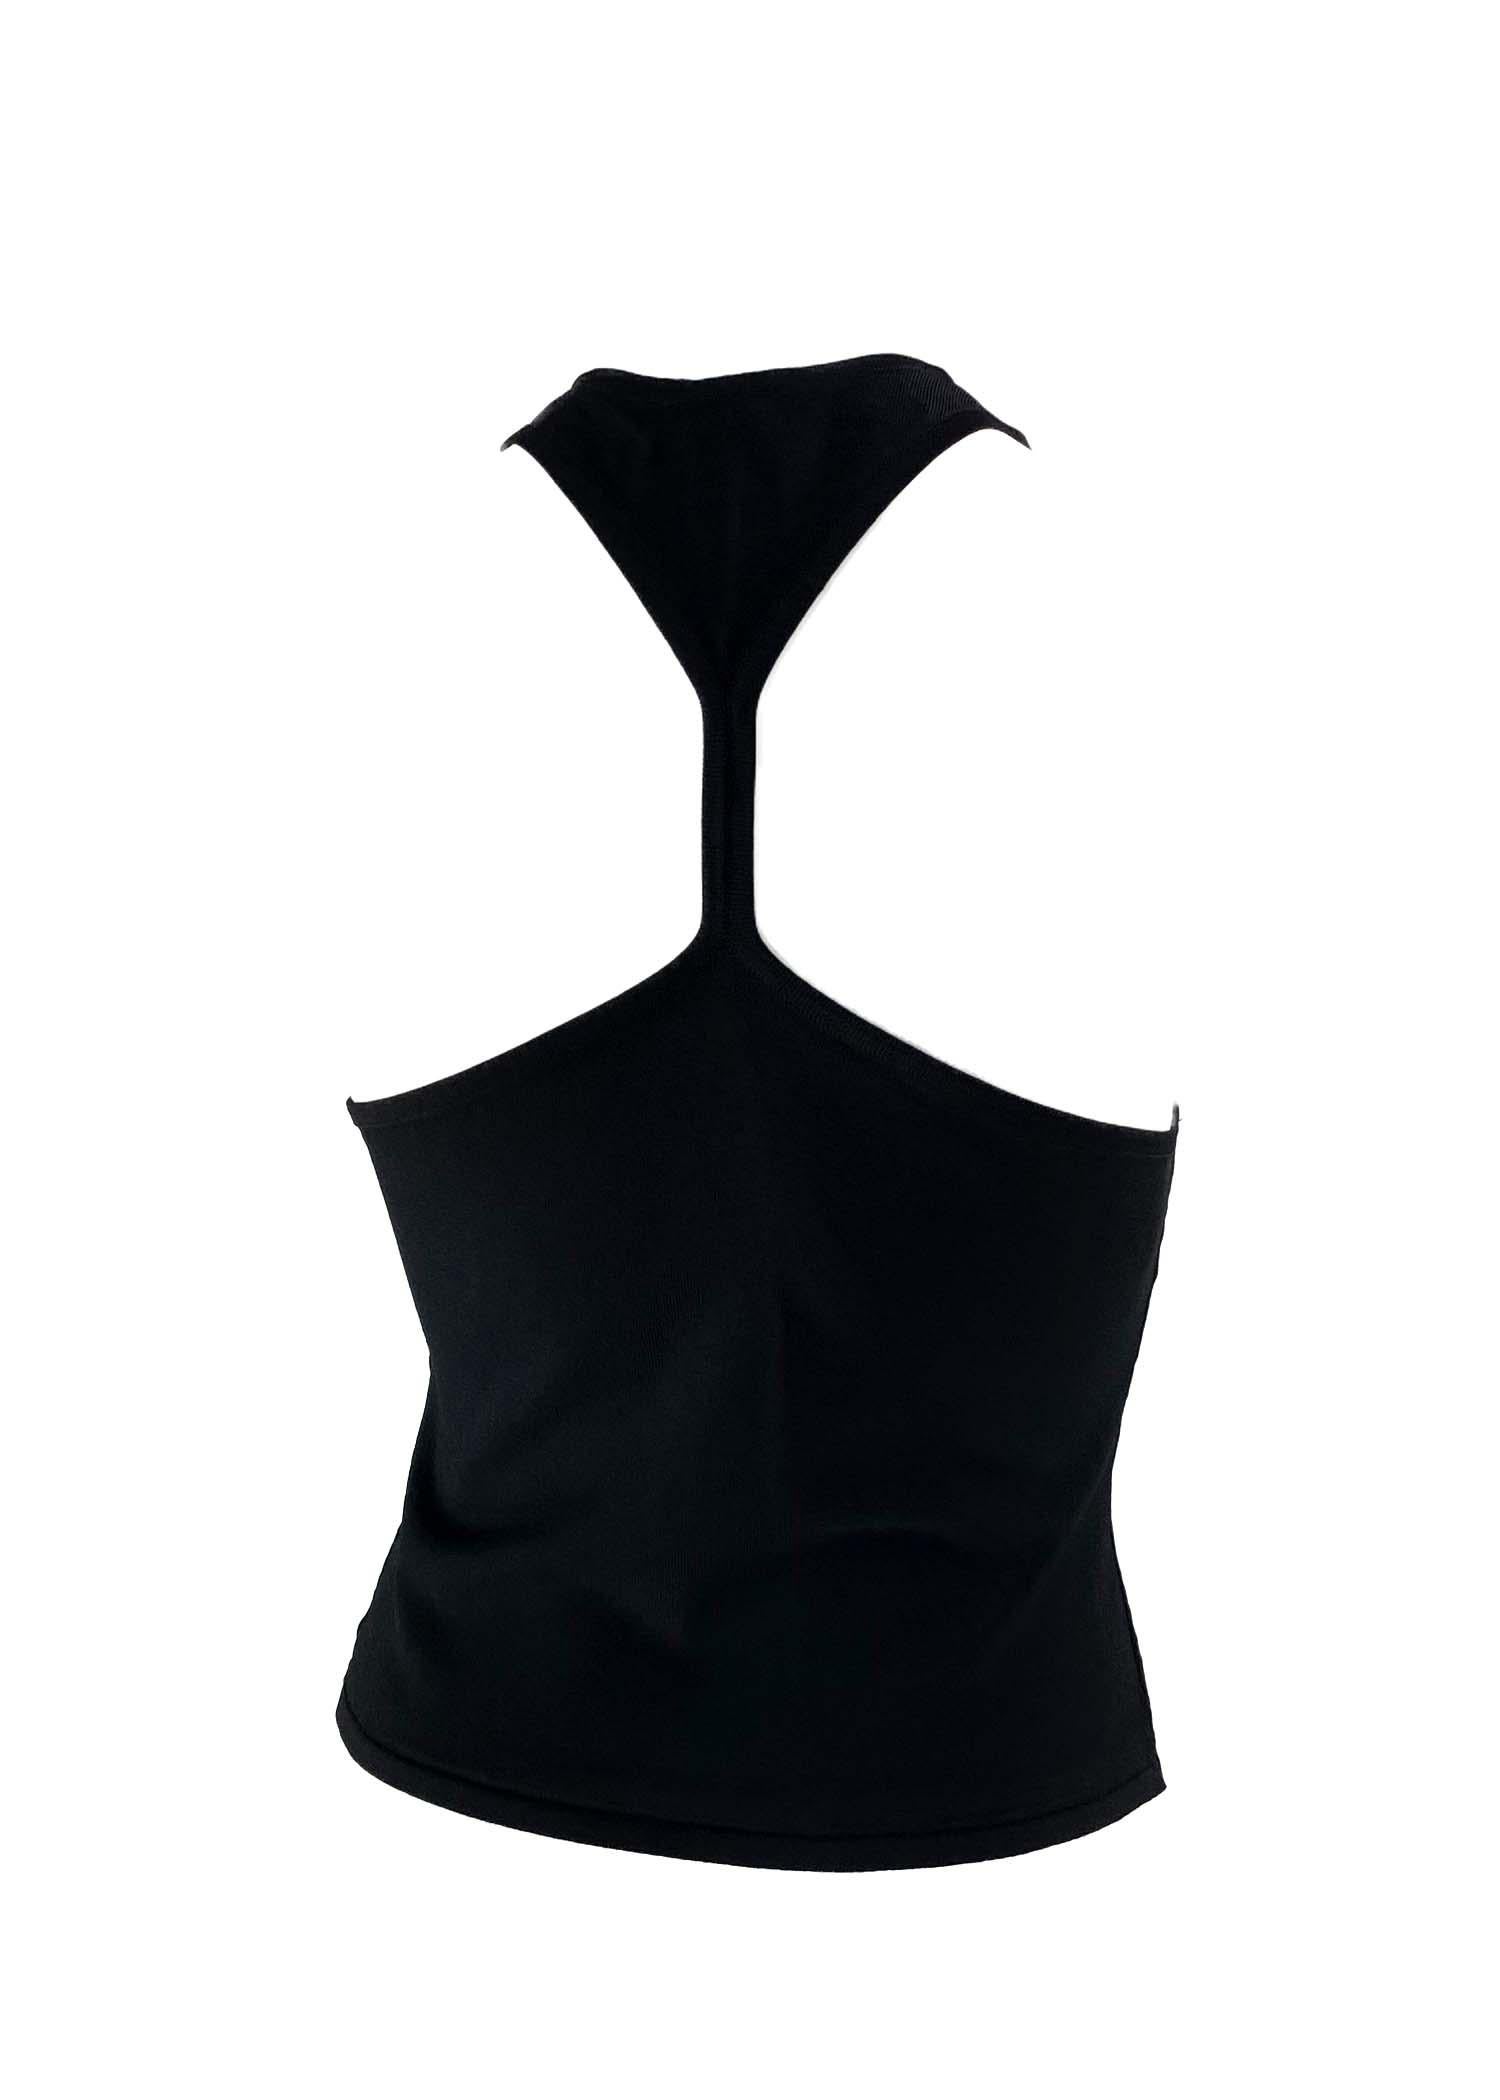 S/S 1998 Gucci by Tom Ford Black Knit Racerback Tank  1